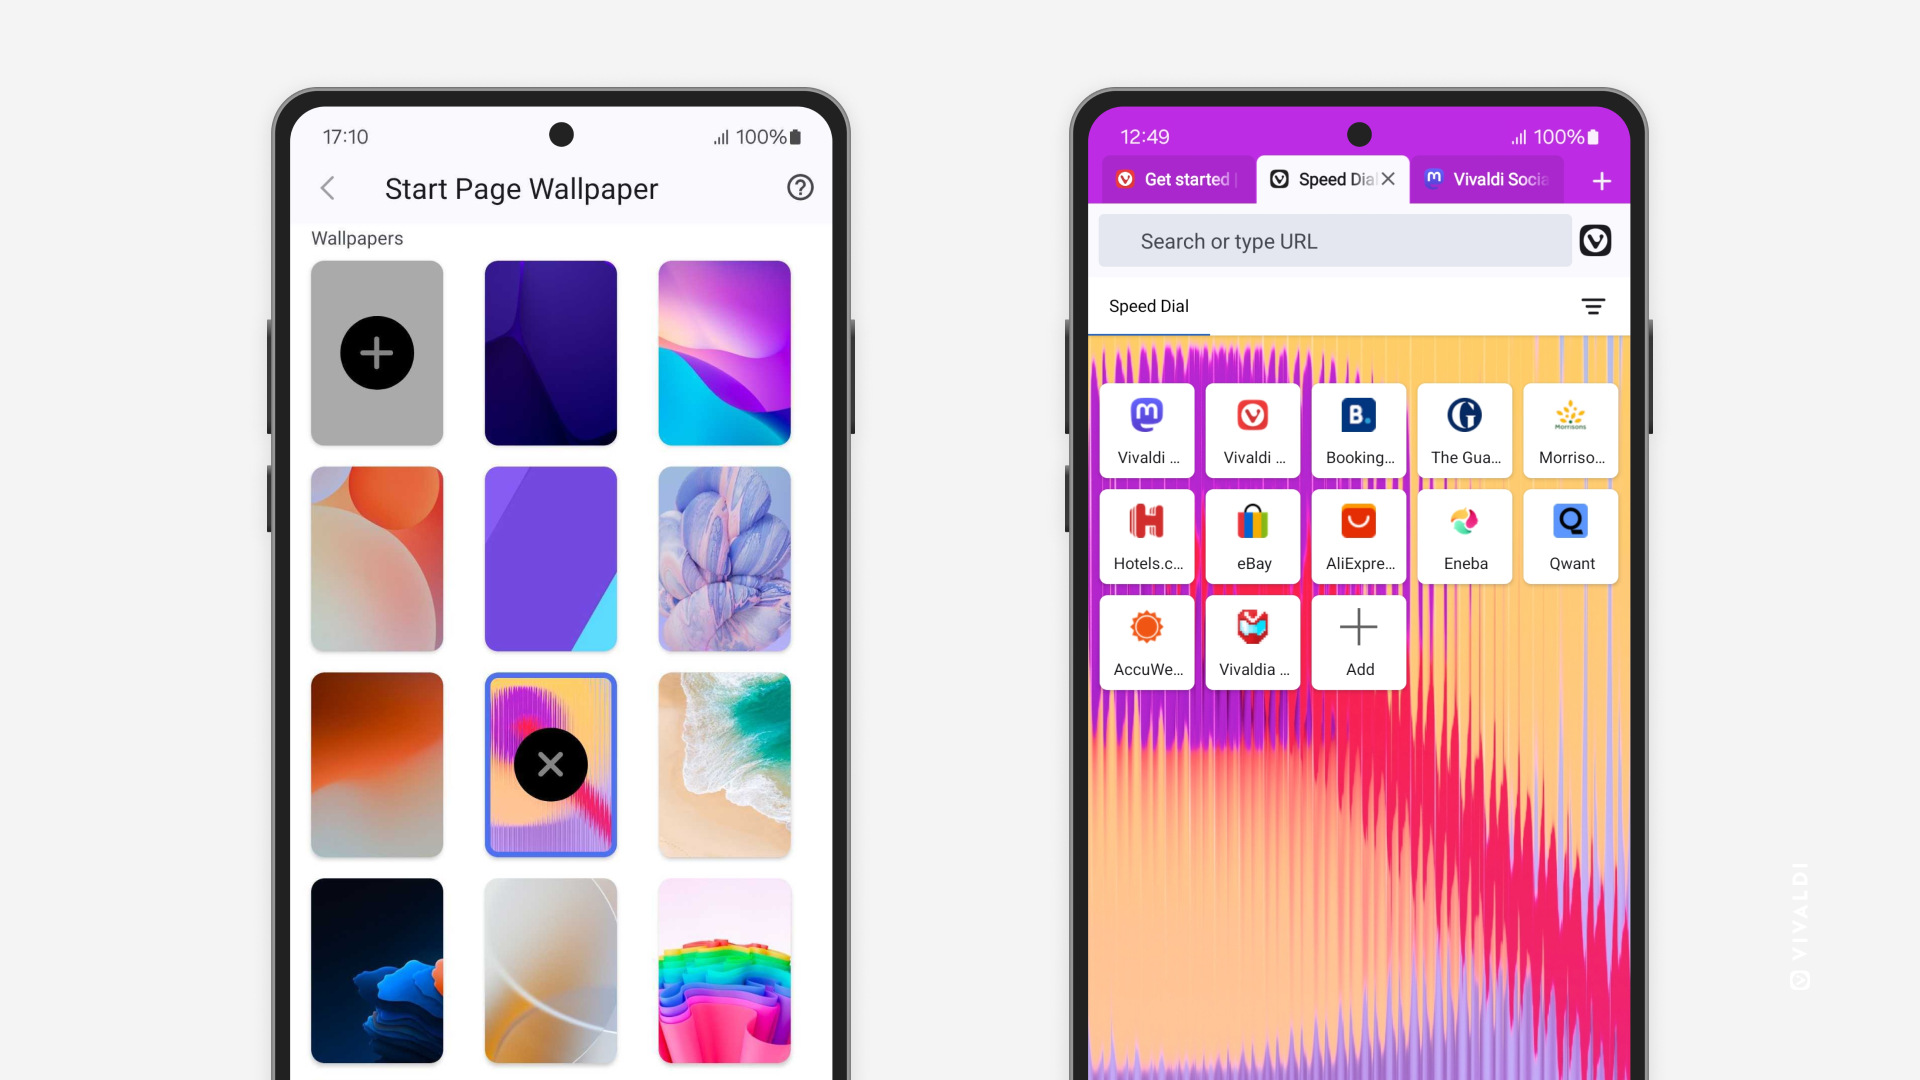 Two phones - one showing Start Page Wallpaper settings, the other showing the Start Page with a colorful wallpaper.